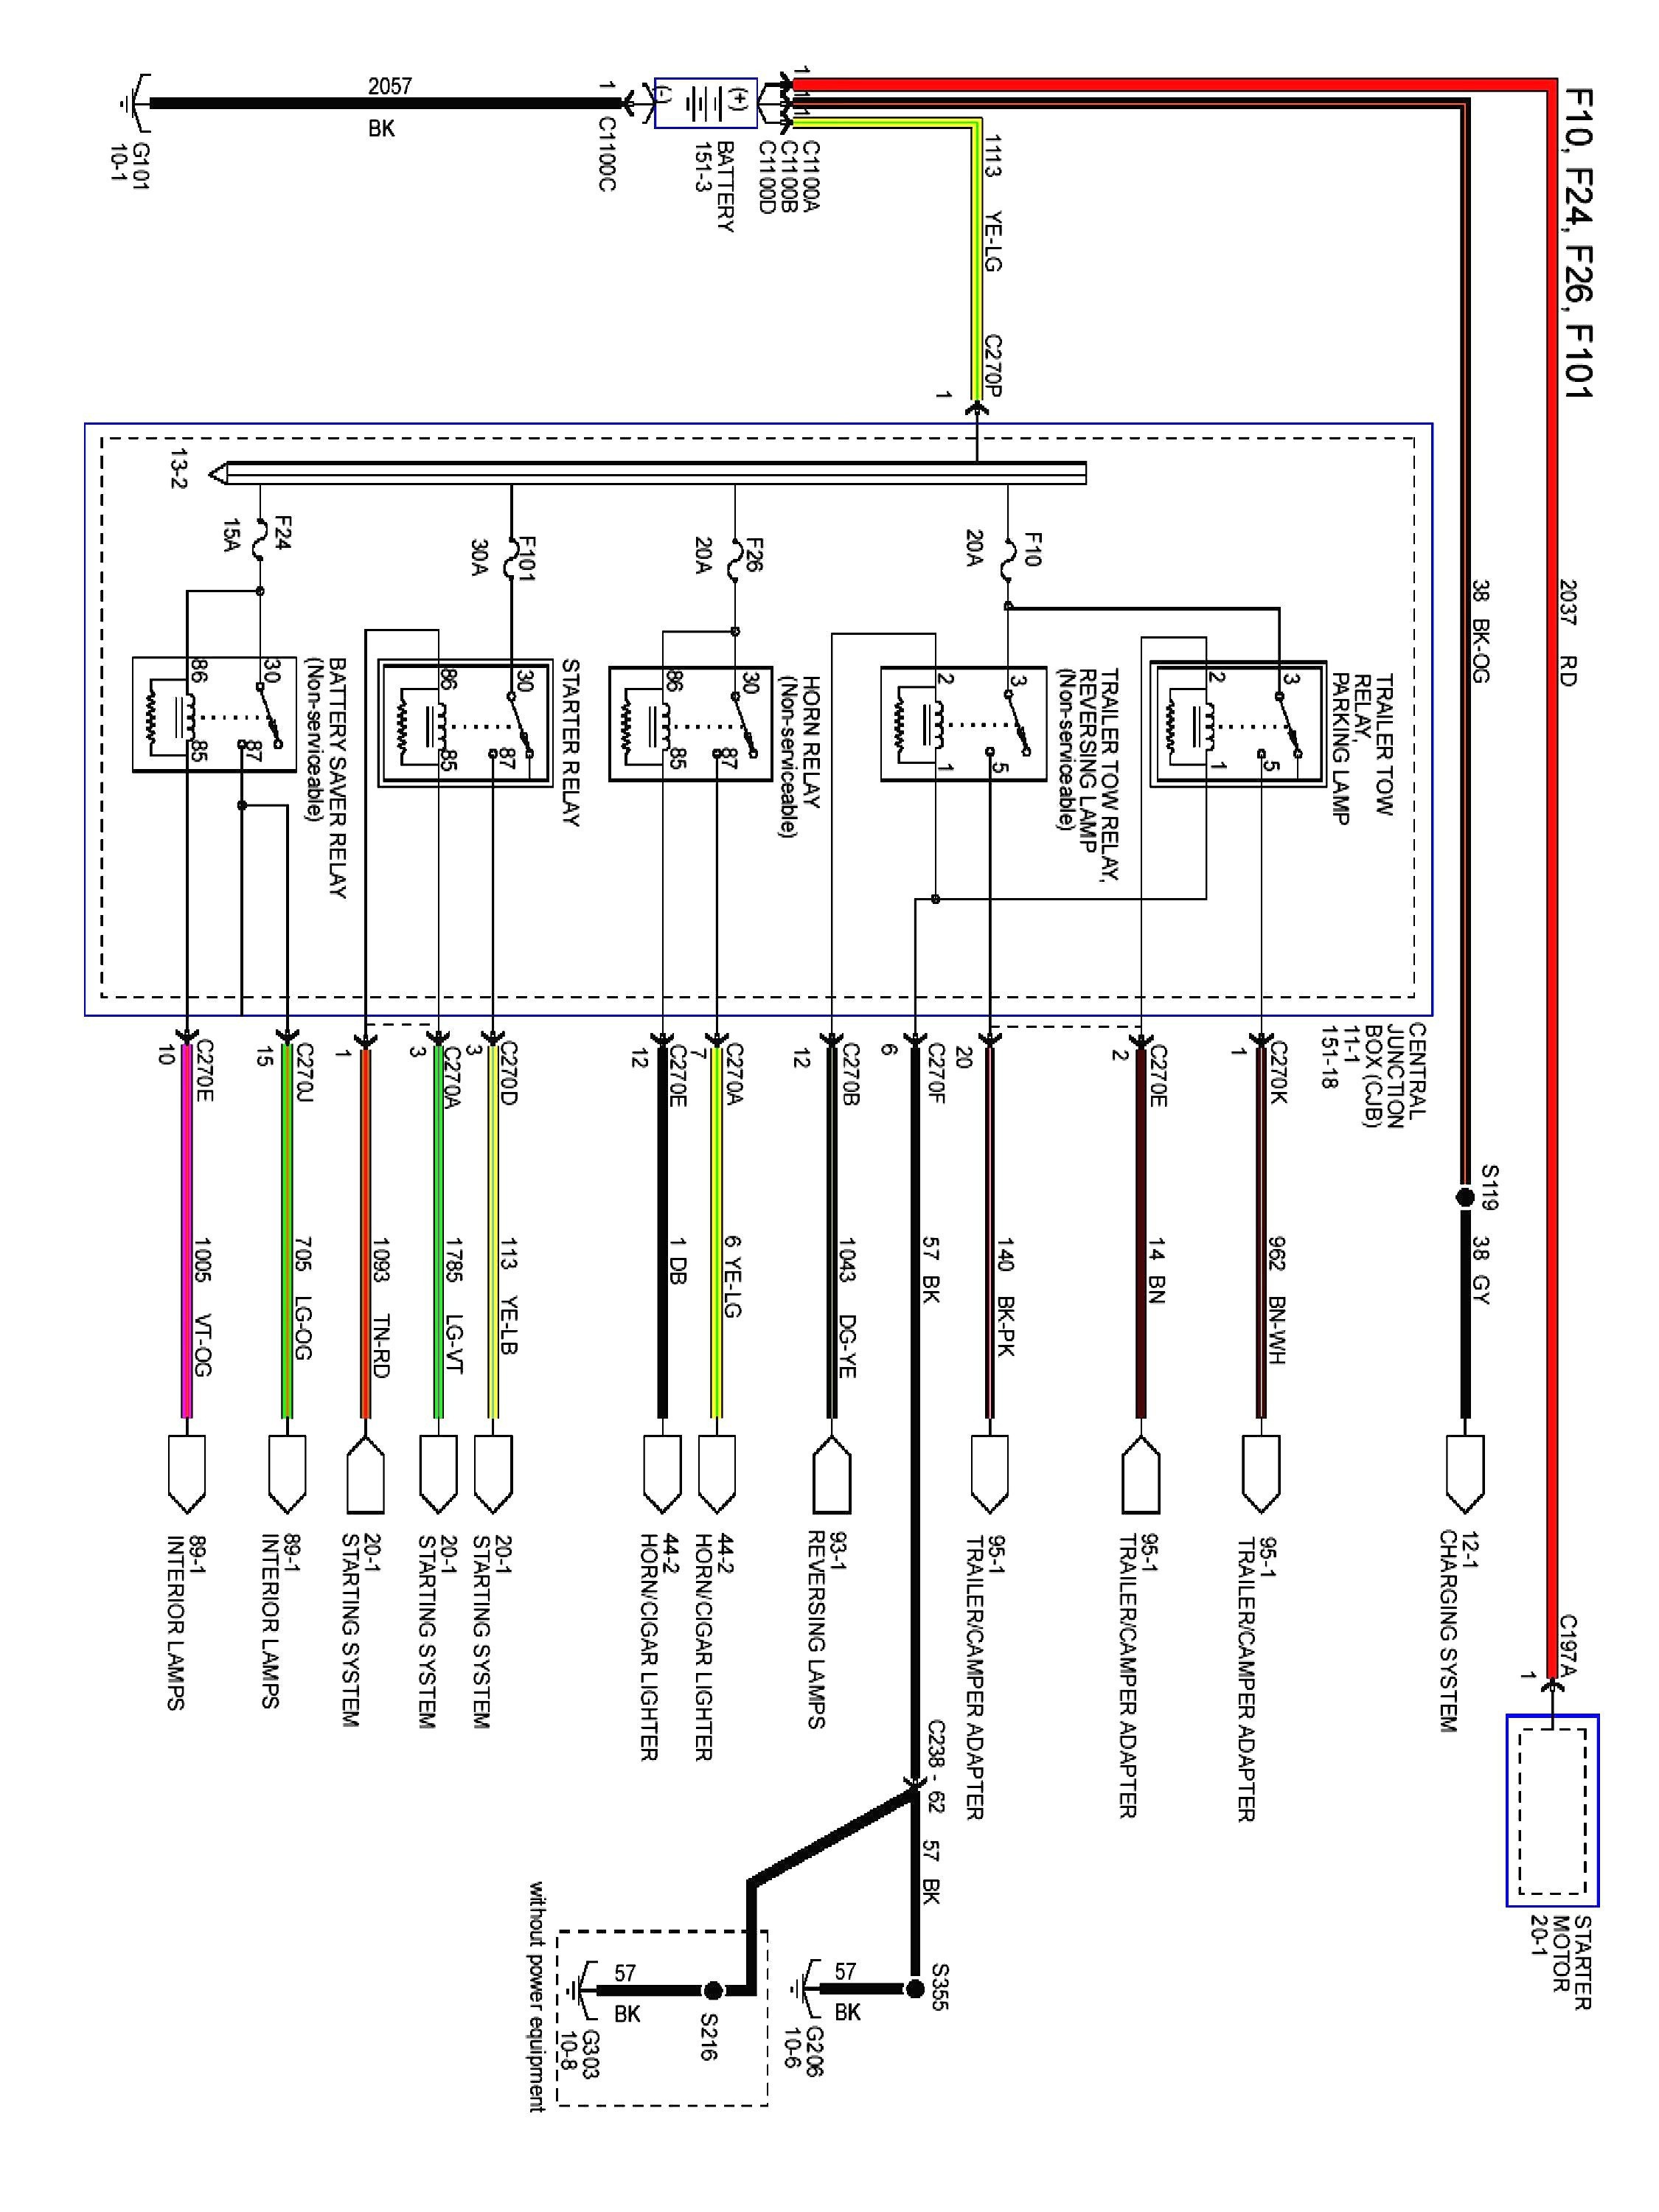 2008 ford Escape Engine Diagram 02 Escape Wiring Diagram ford Radio Image Beautiful 2004 Throughout Of 2008 ford Escape Engine Diagram